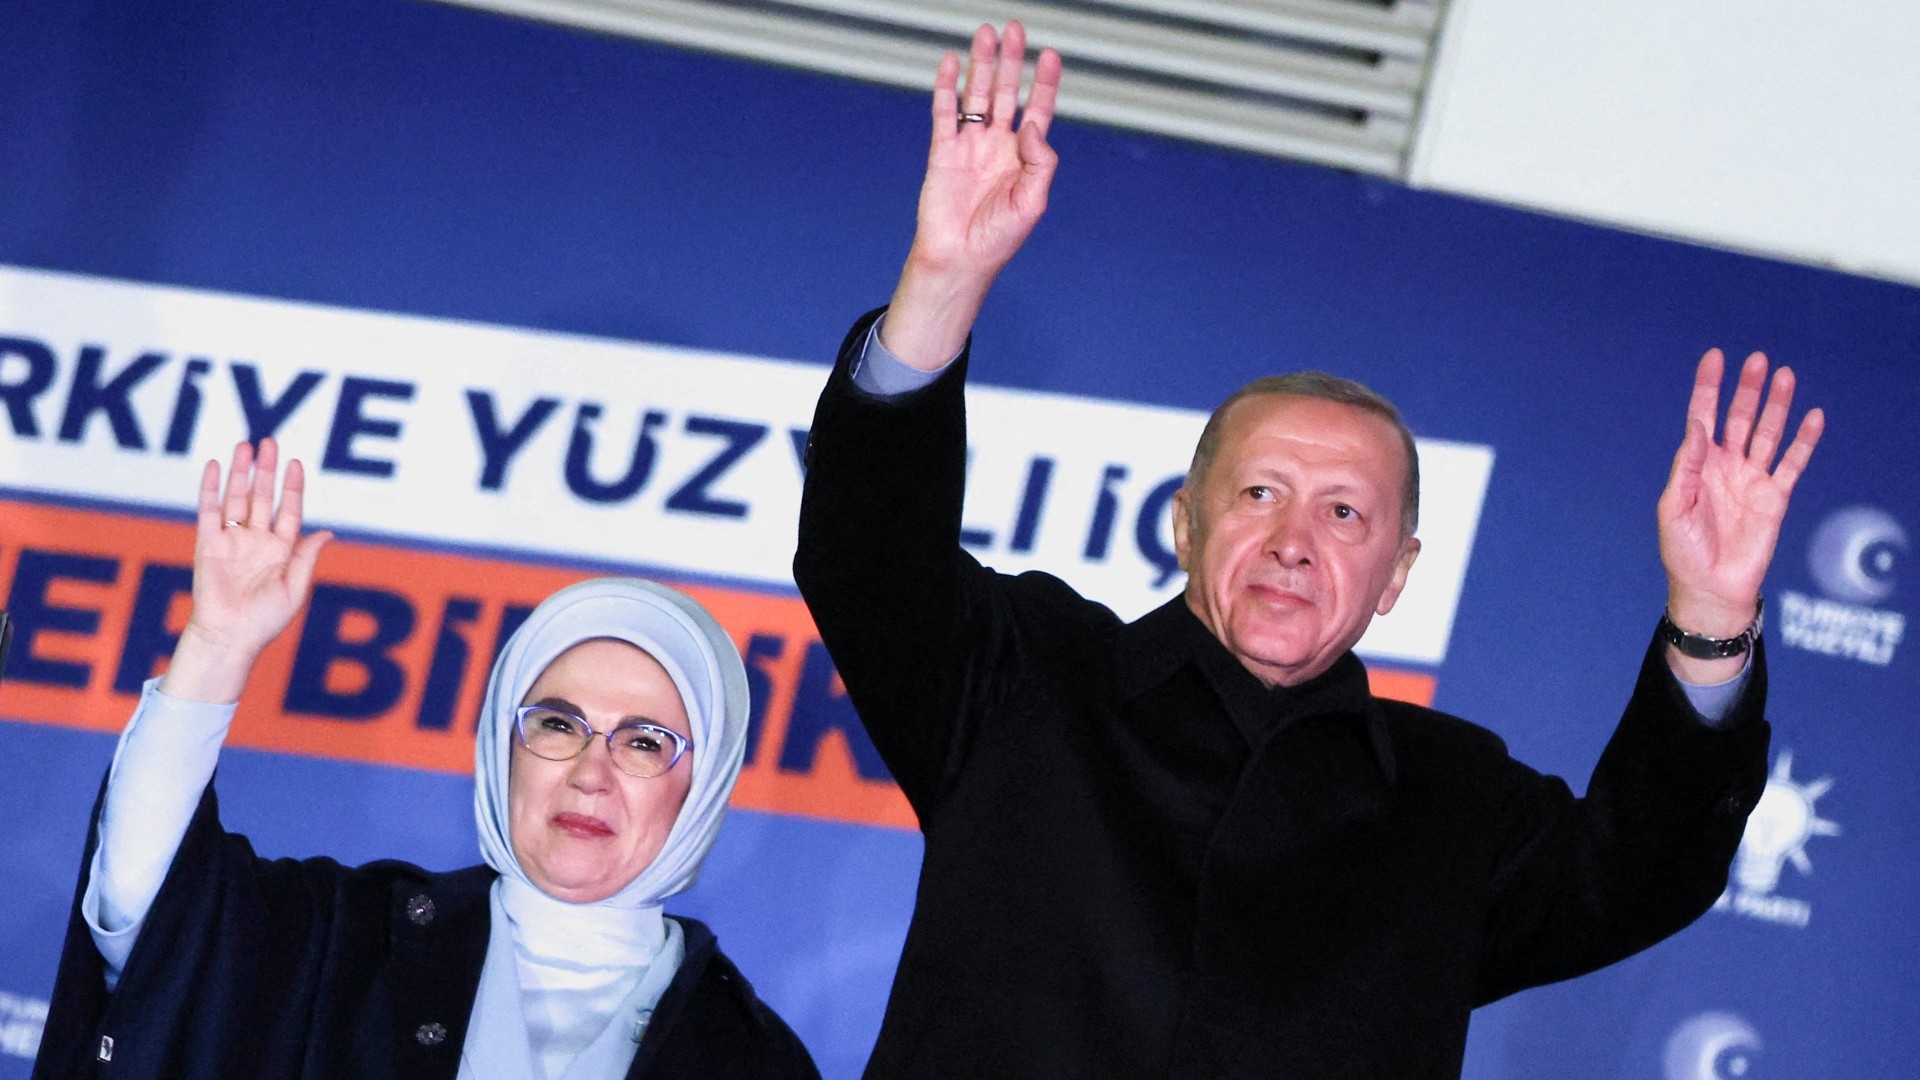 Turkish President Recep Tayyip Erdogan, accompanied by his wife Ermine Erdogan, greets supporters at the AKP headquarters in Ankara (Reuters)